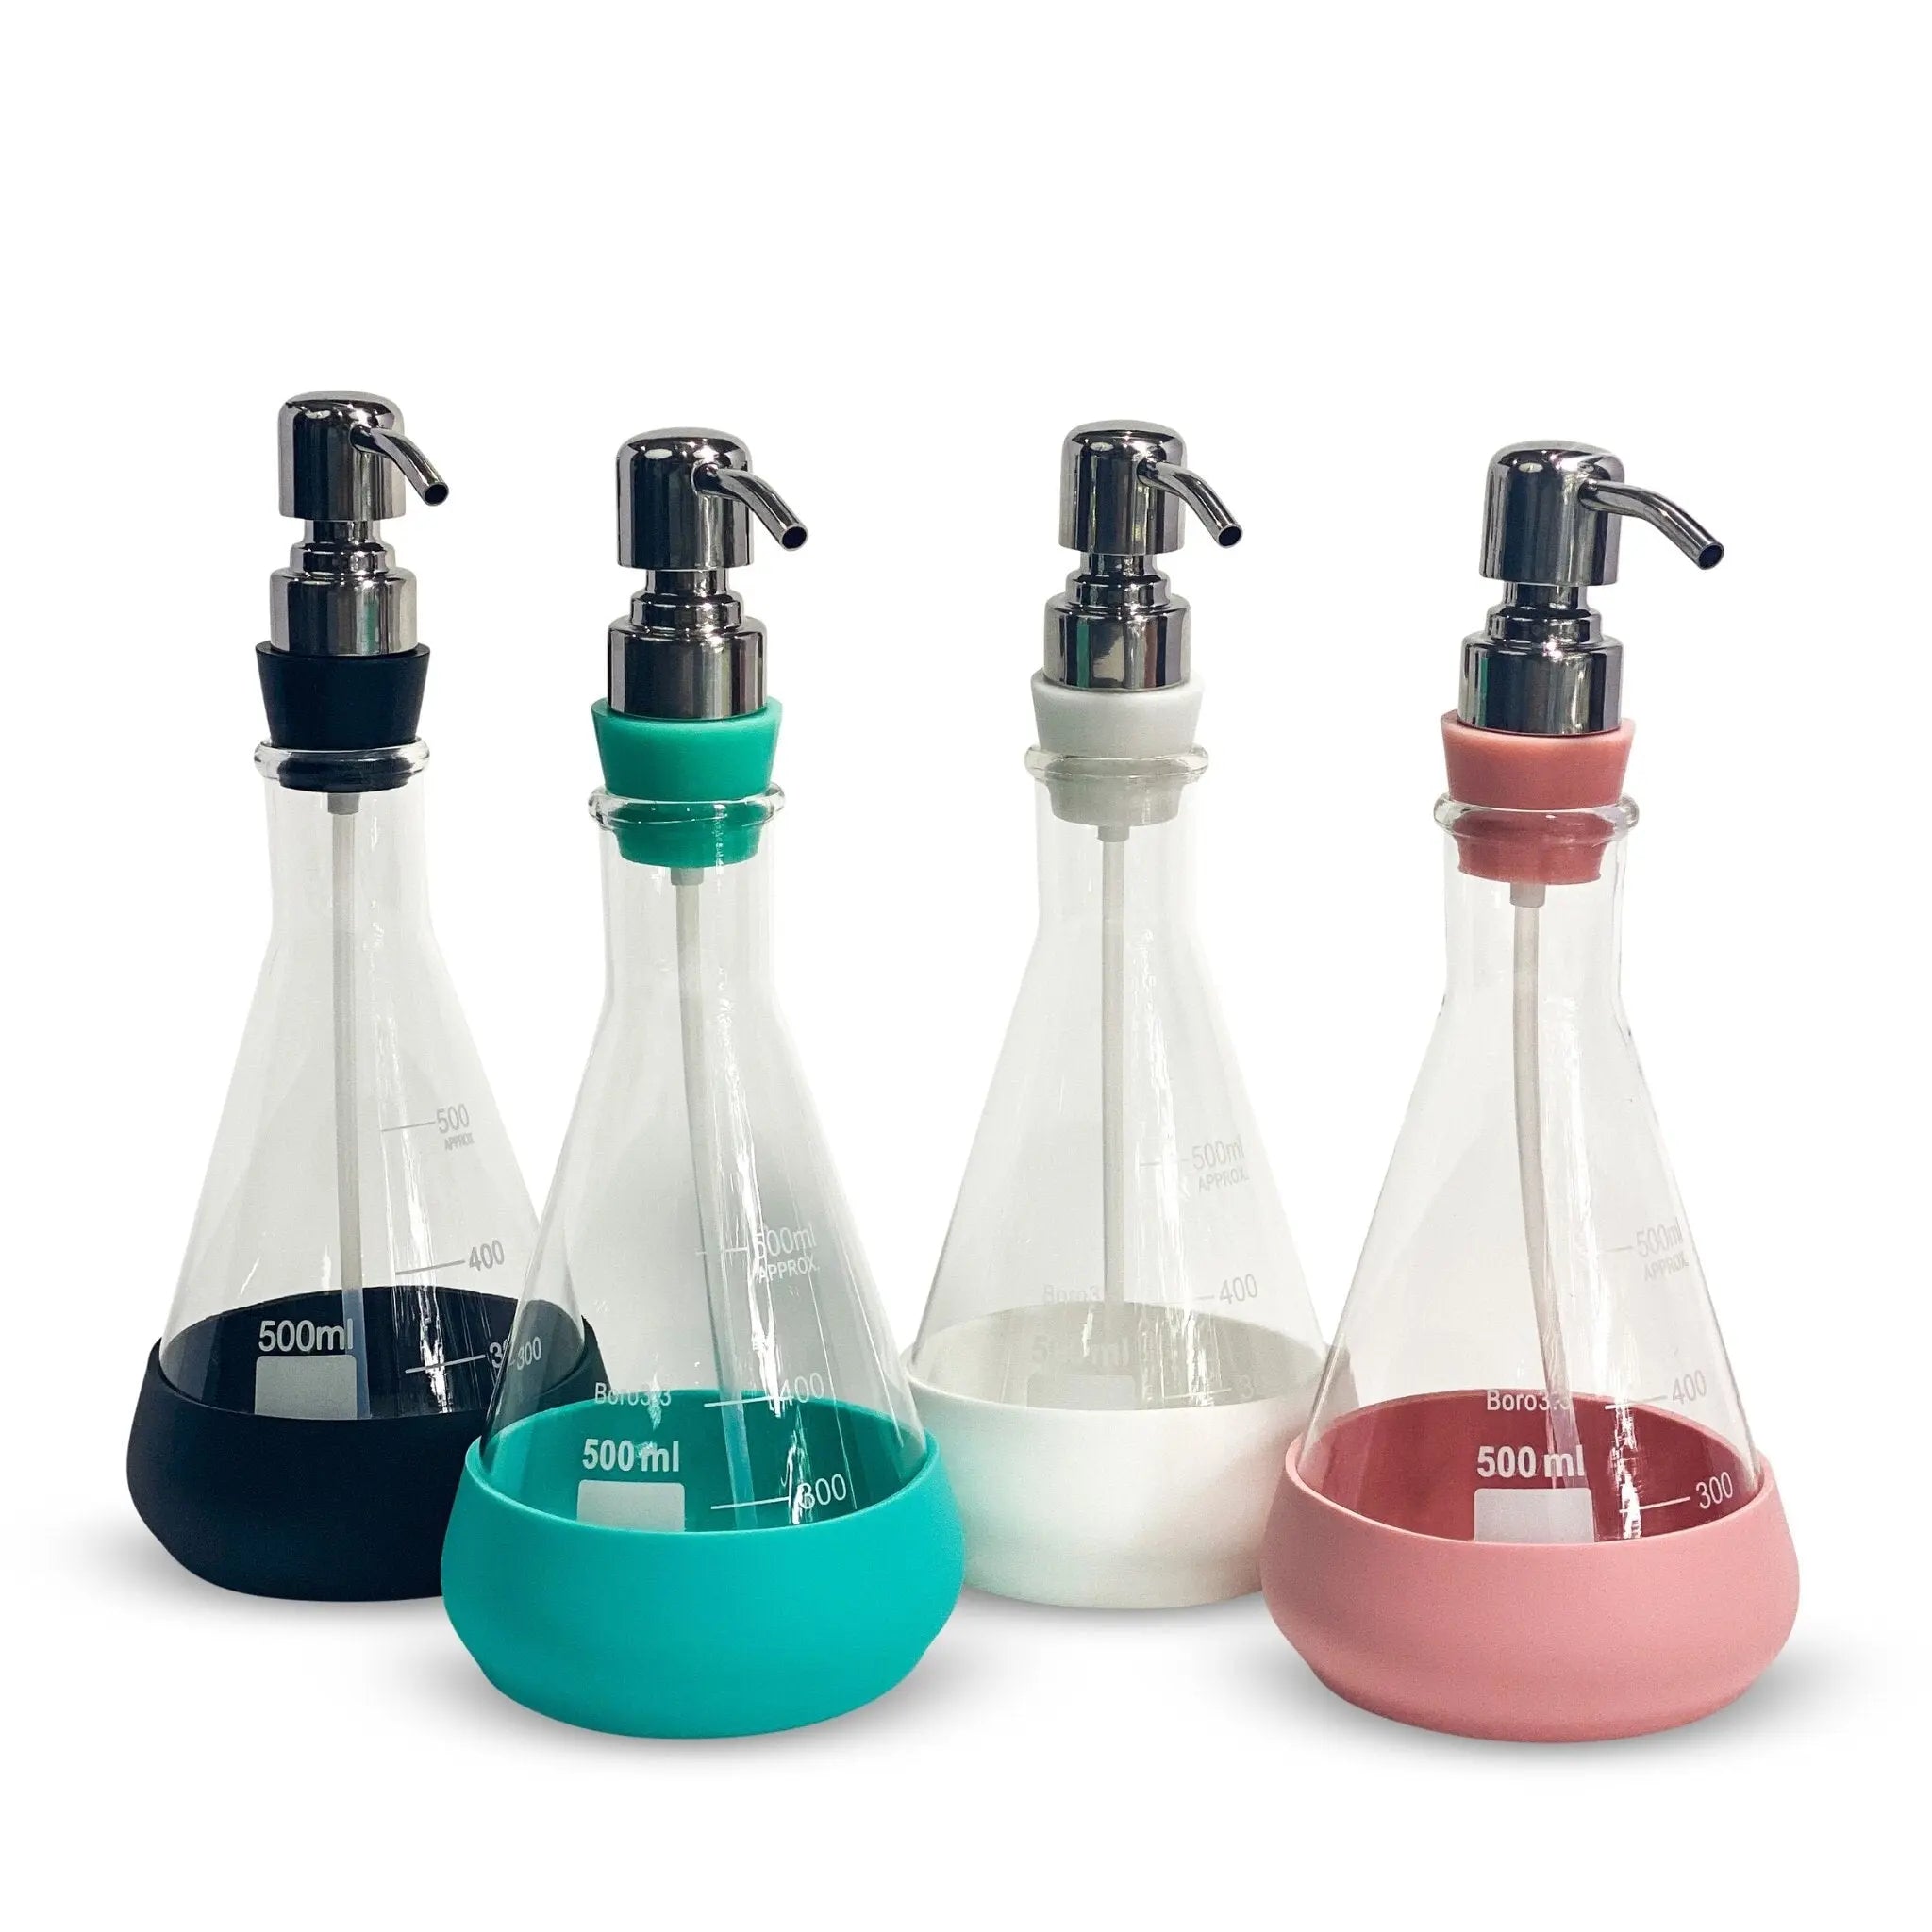 Chemistry Soap Dispenser | Larger Clear Flask | Silicone & Pump Top Options | Chemistry Teacher Gift